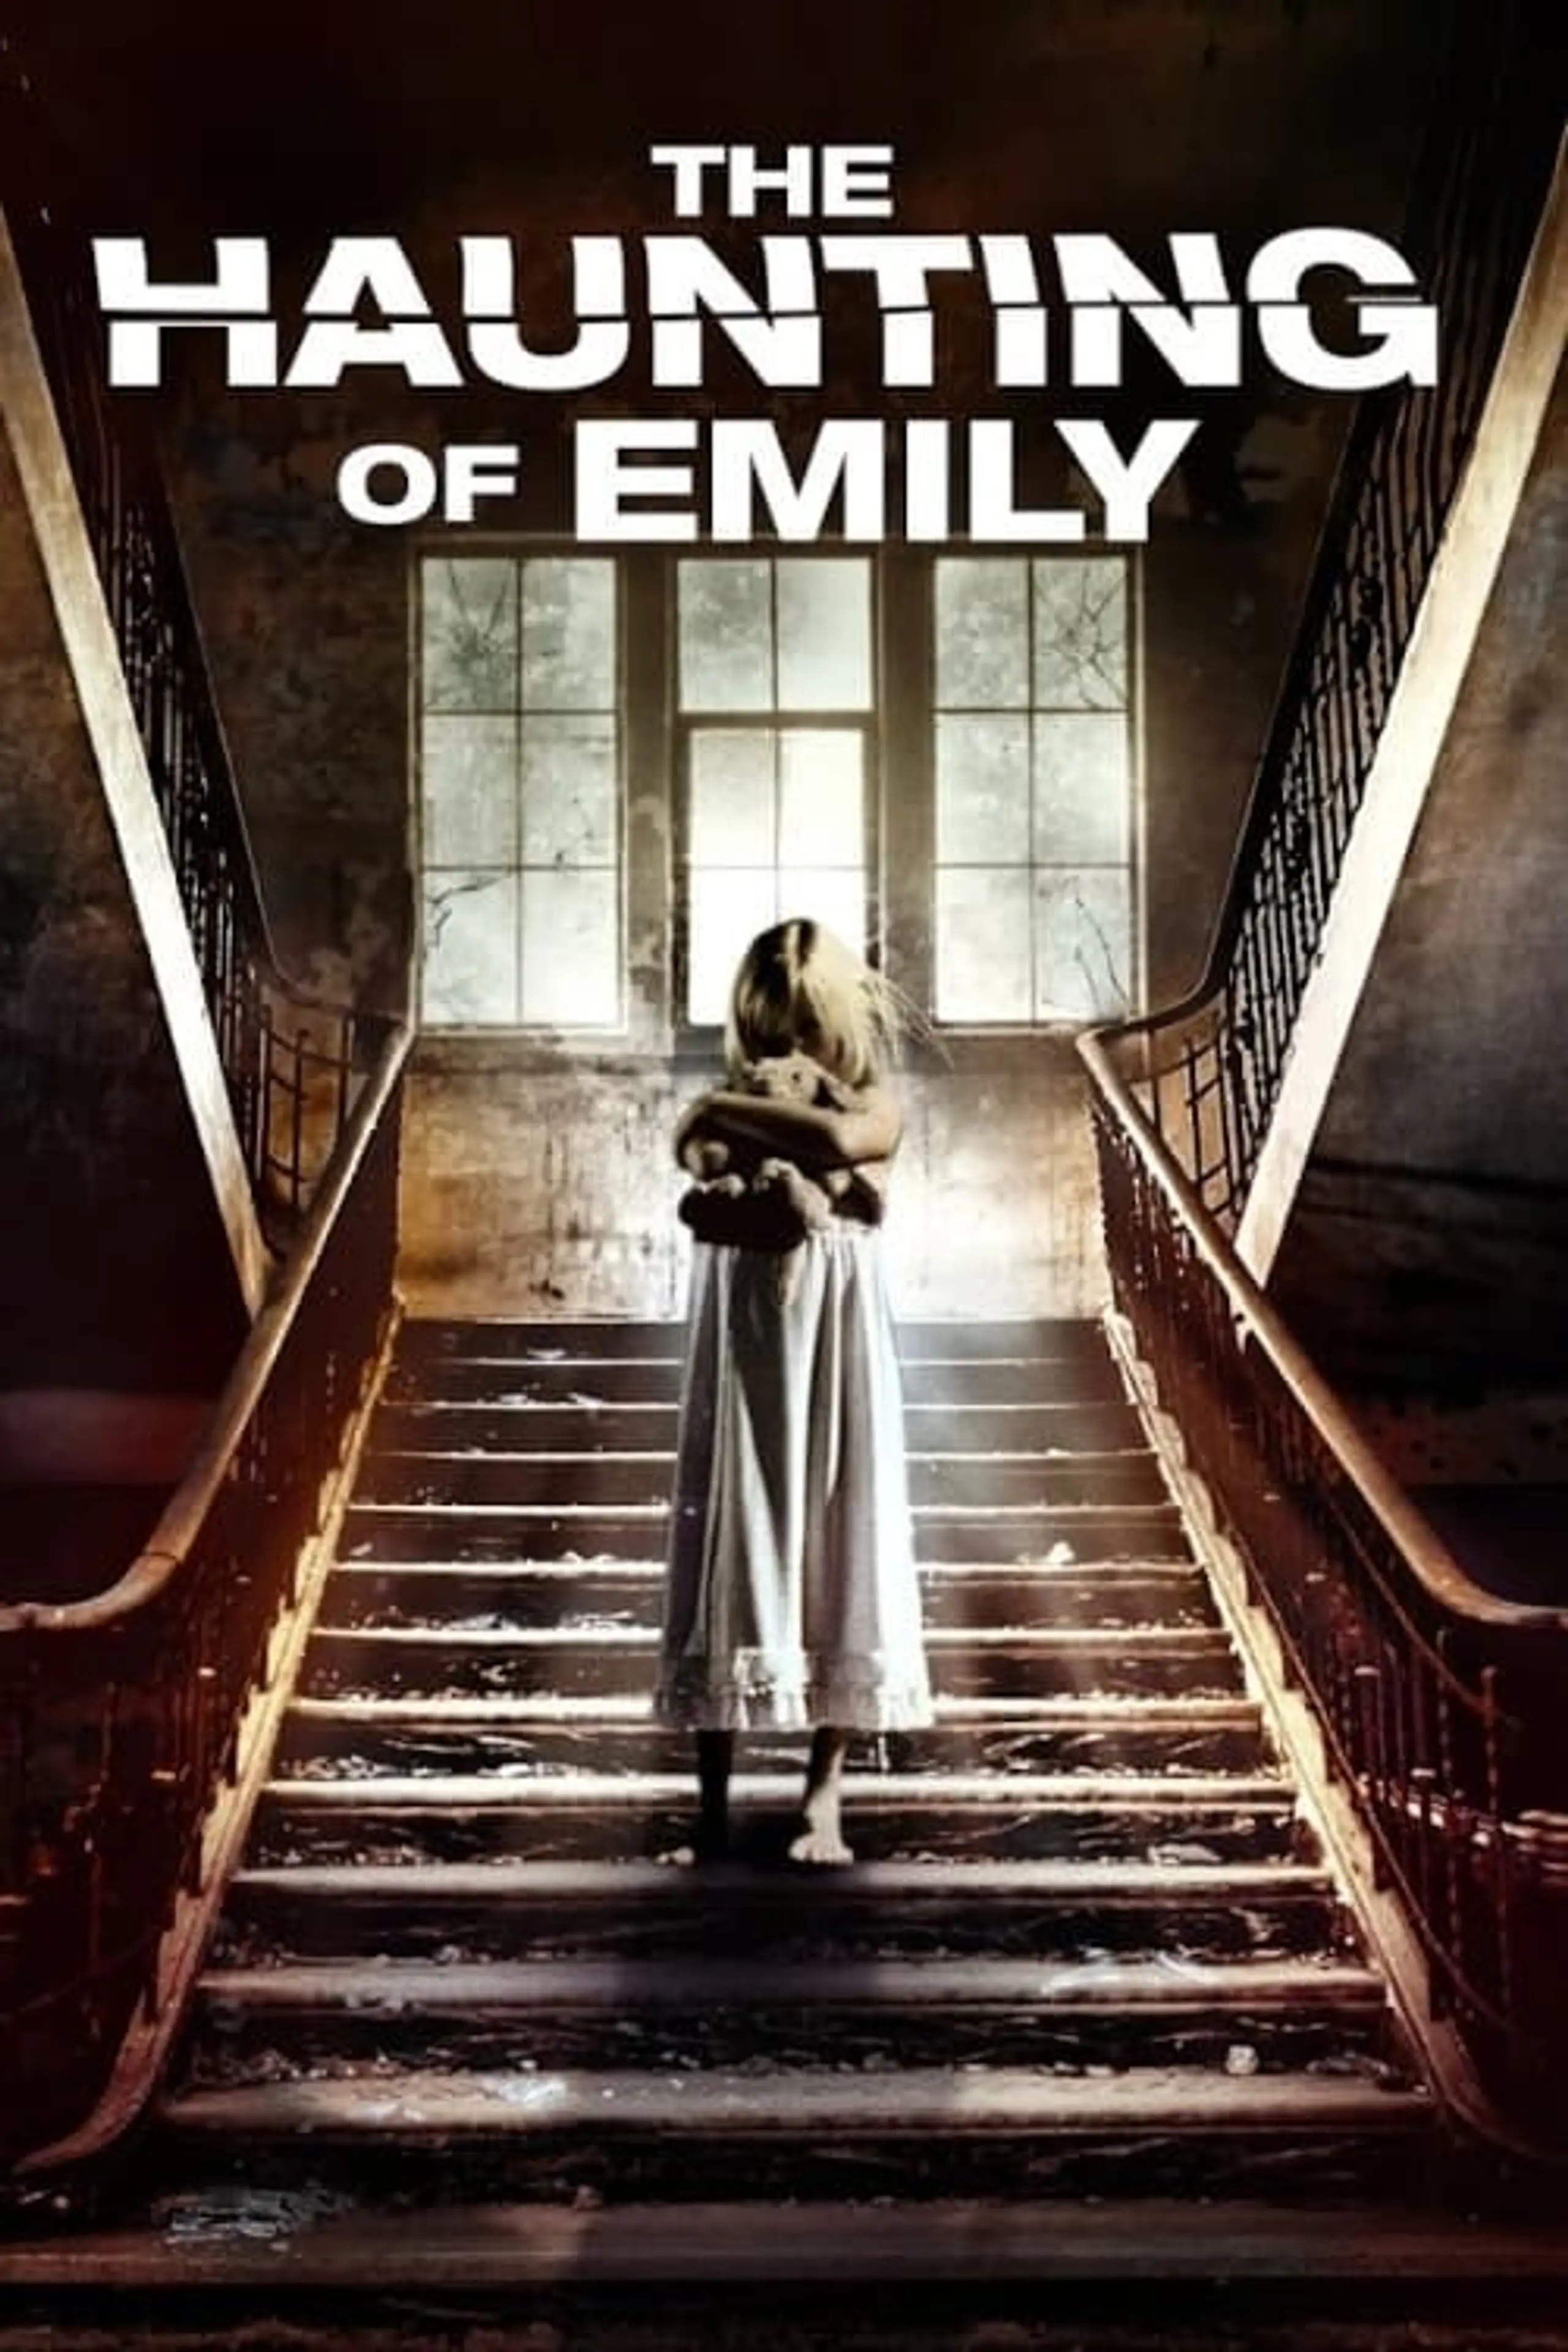 The Haunting of Emily